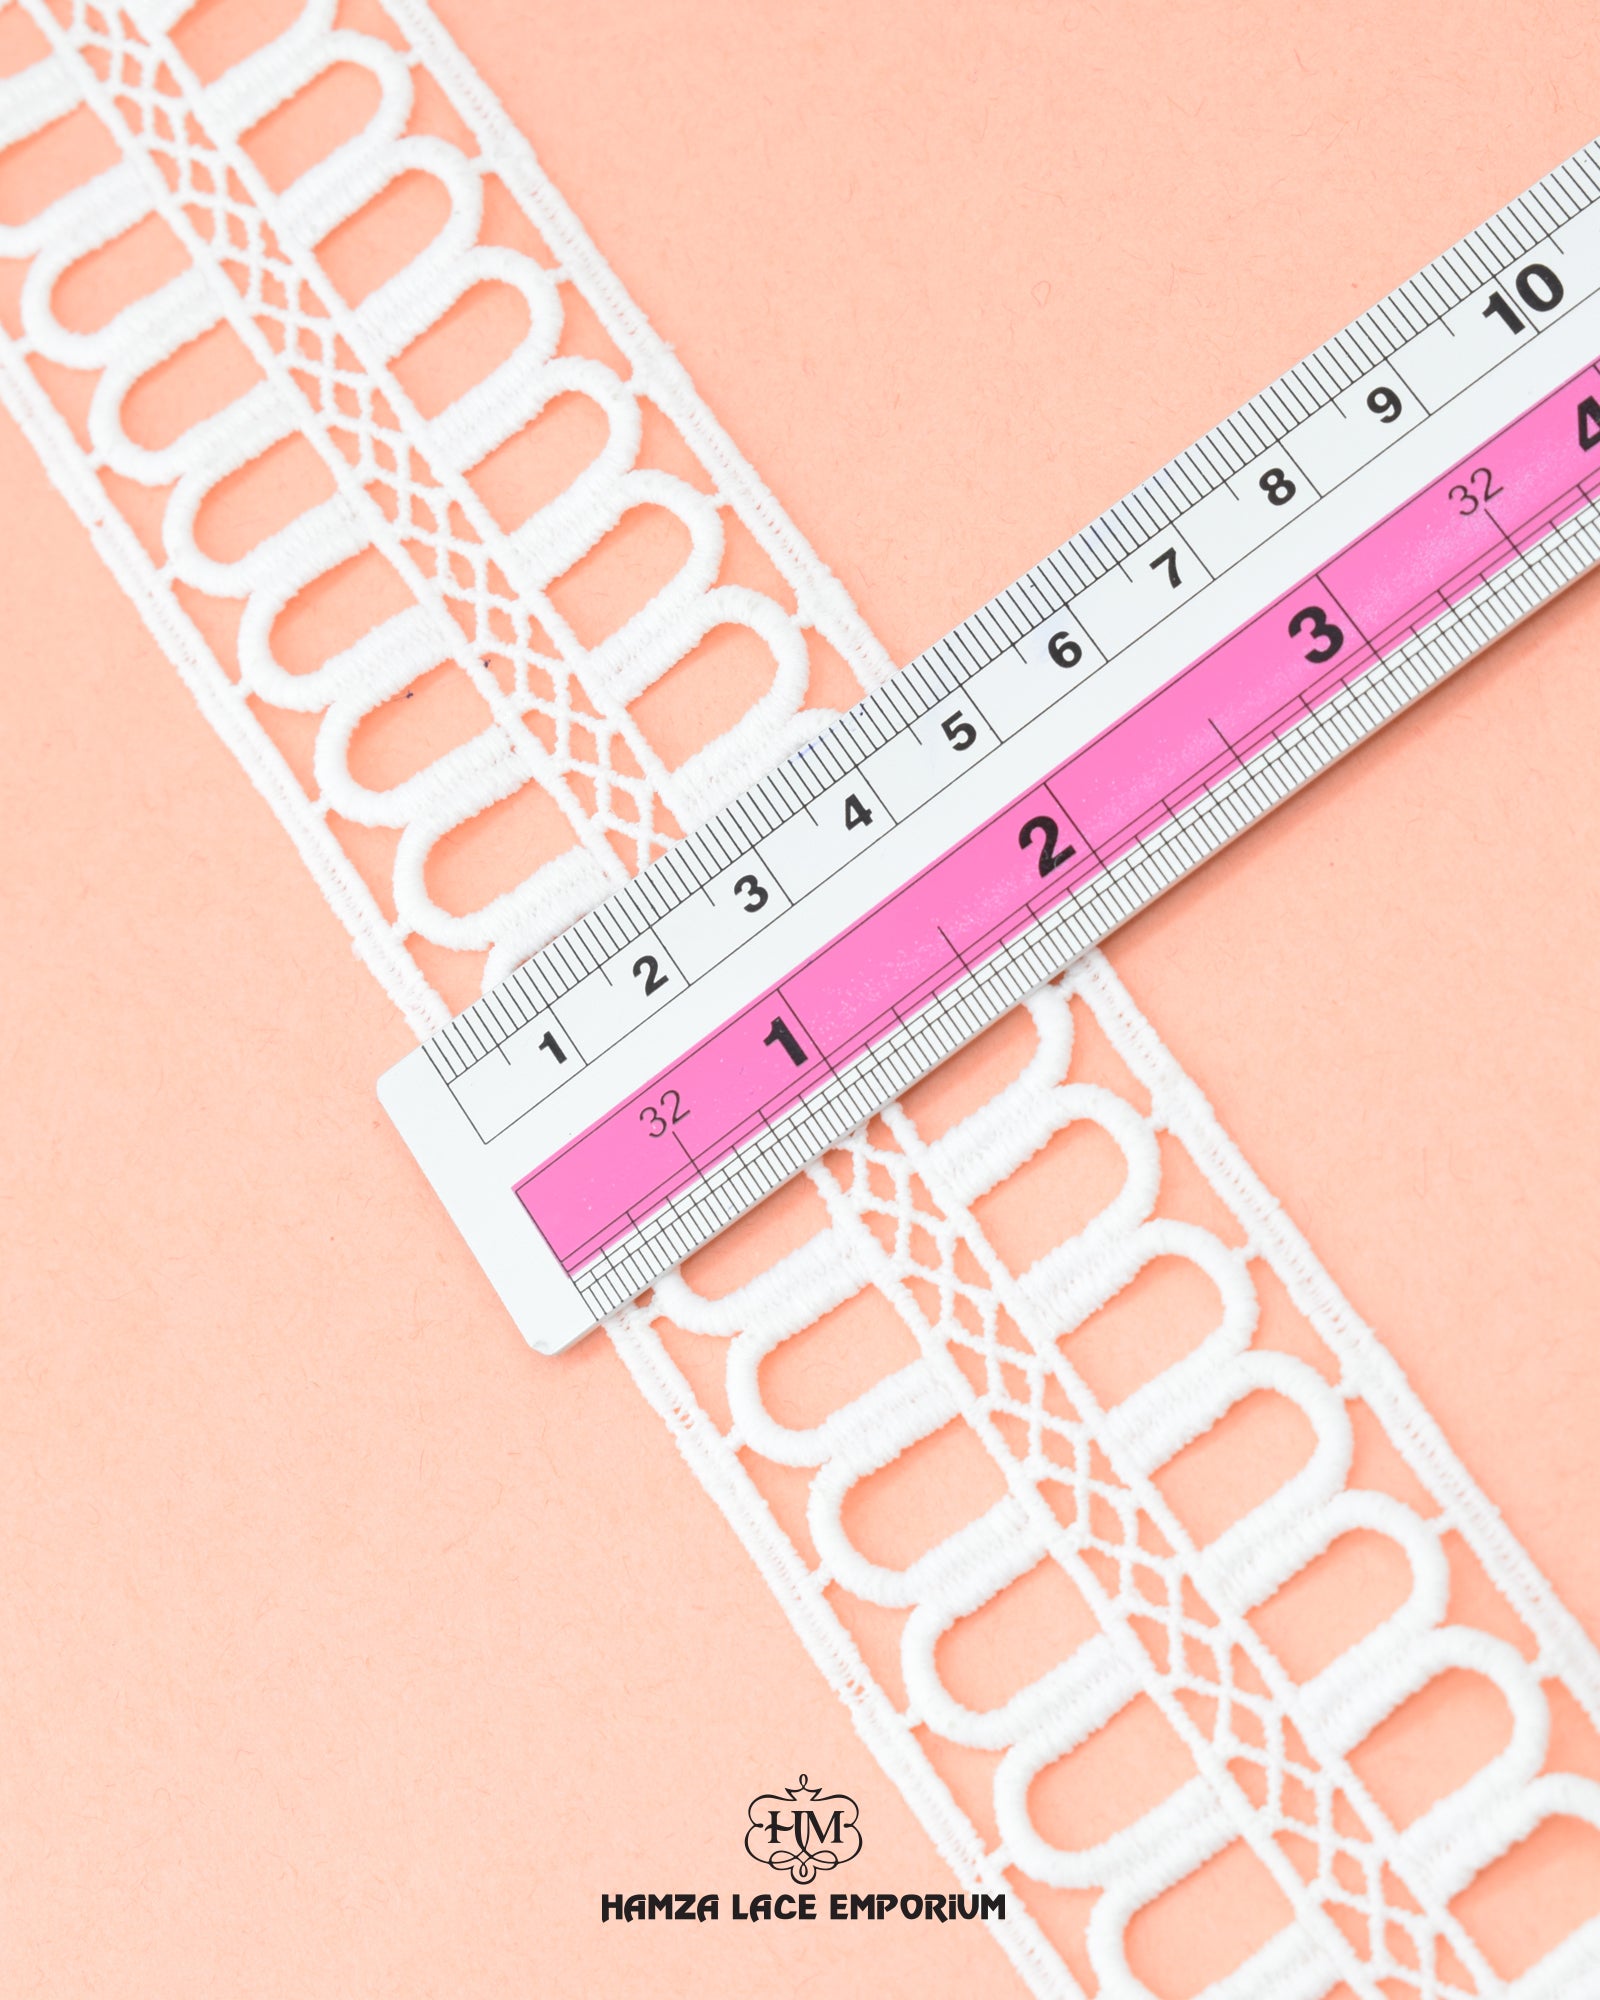 Size of the 'Center Filling Lace 3585' is shown as '2' inches with the help of a ruler